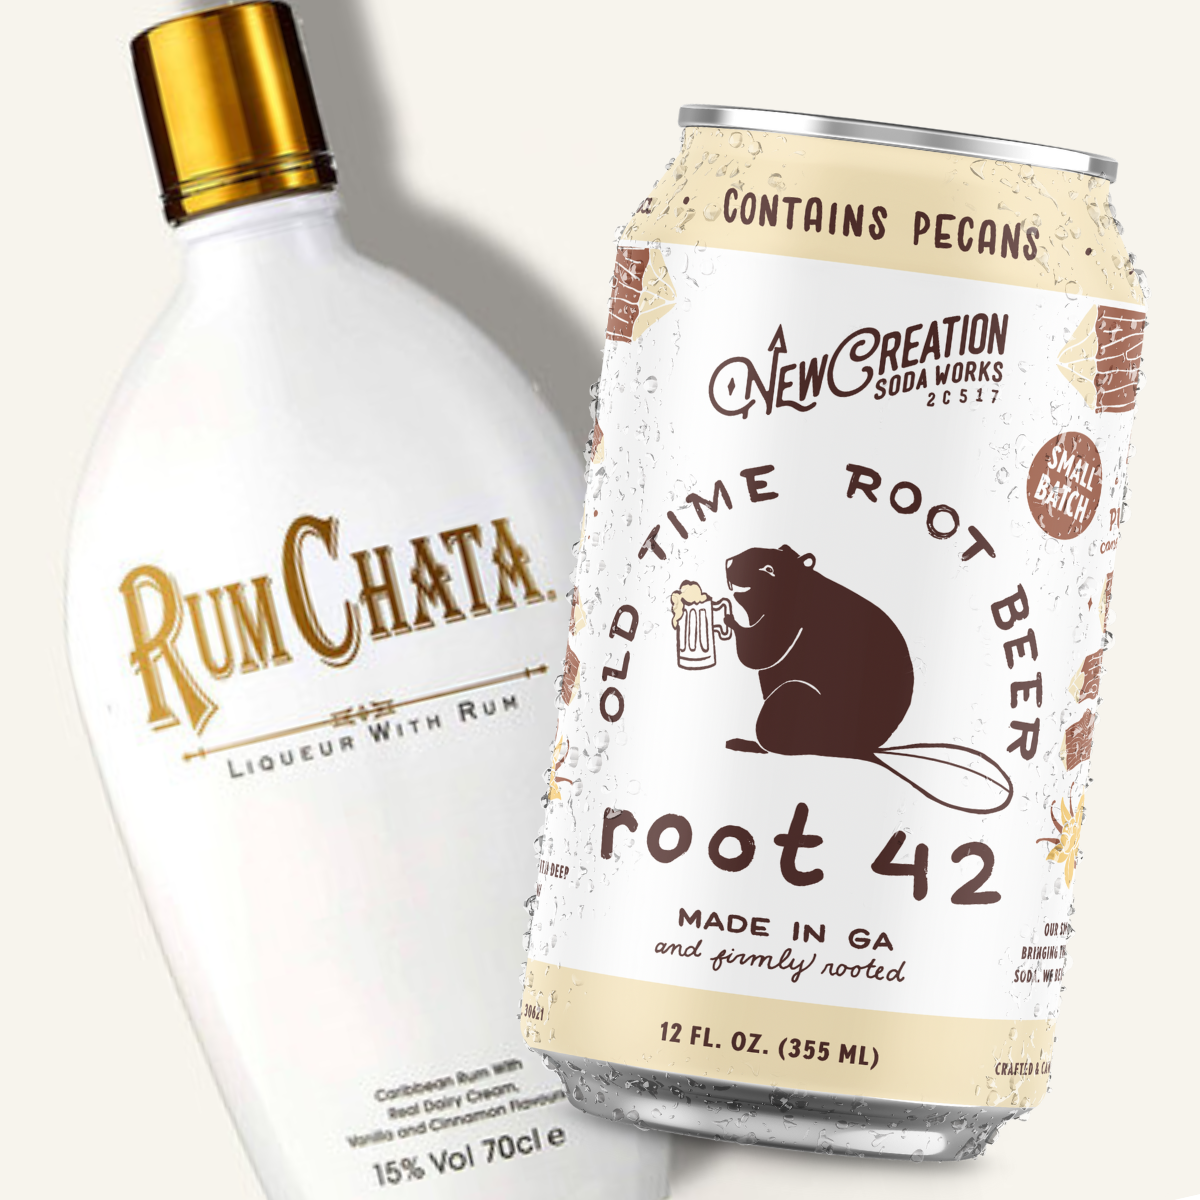 Rumchata and root beer